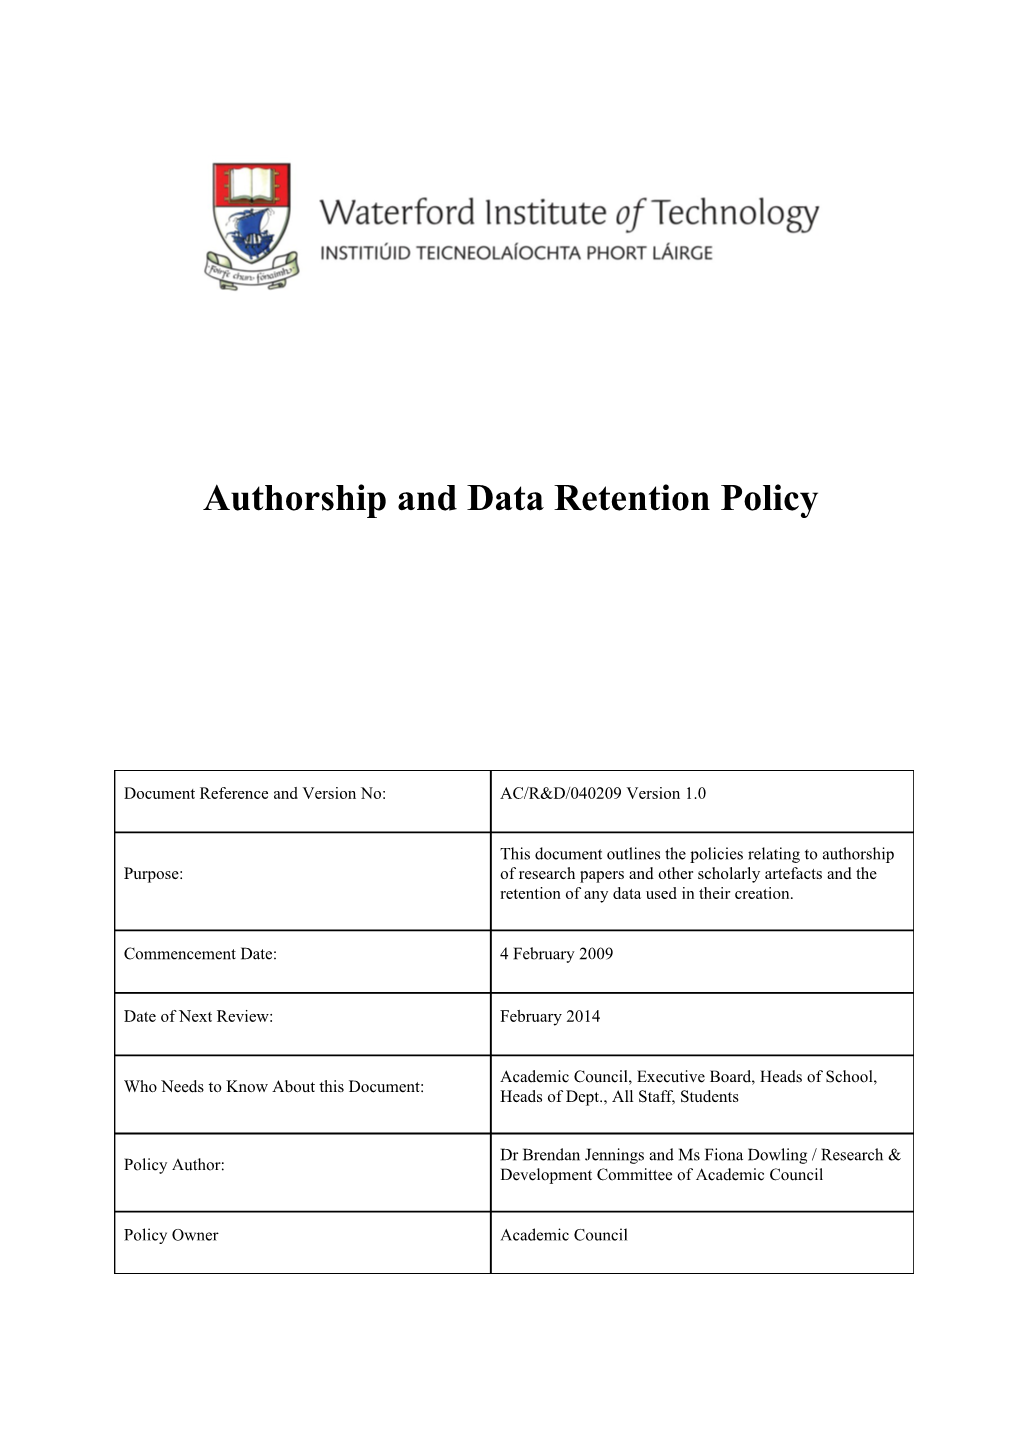 Authorship and Data Retention Policy